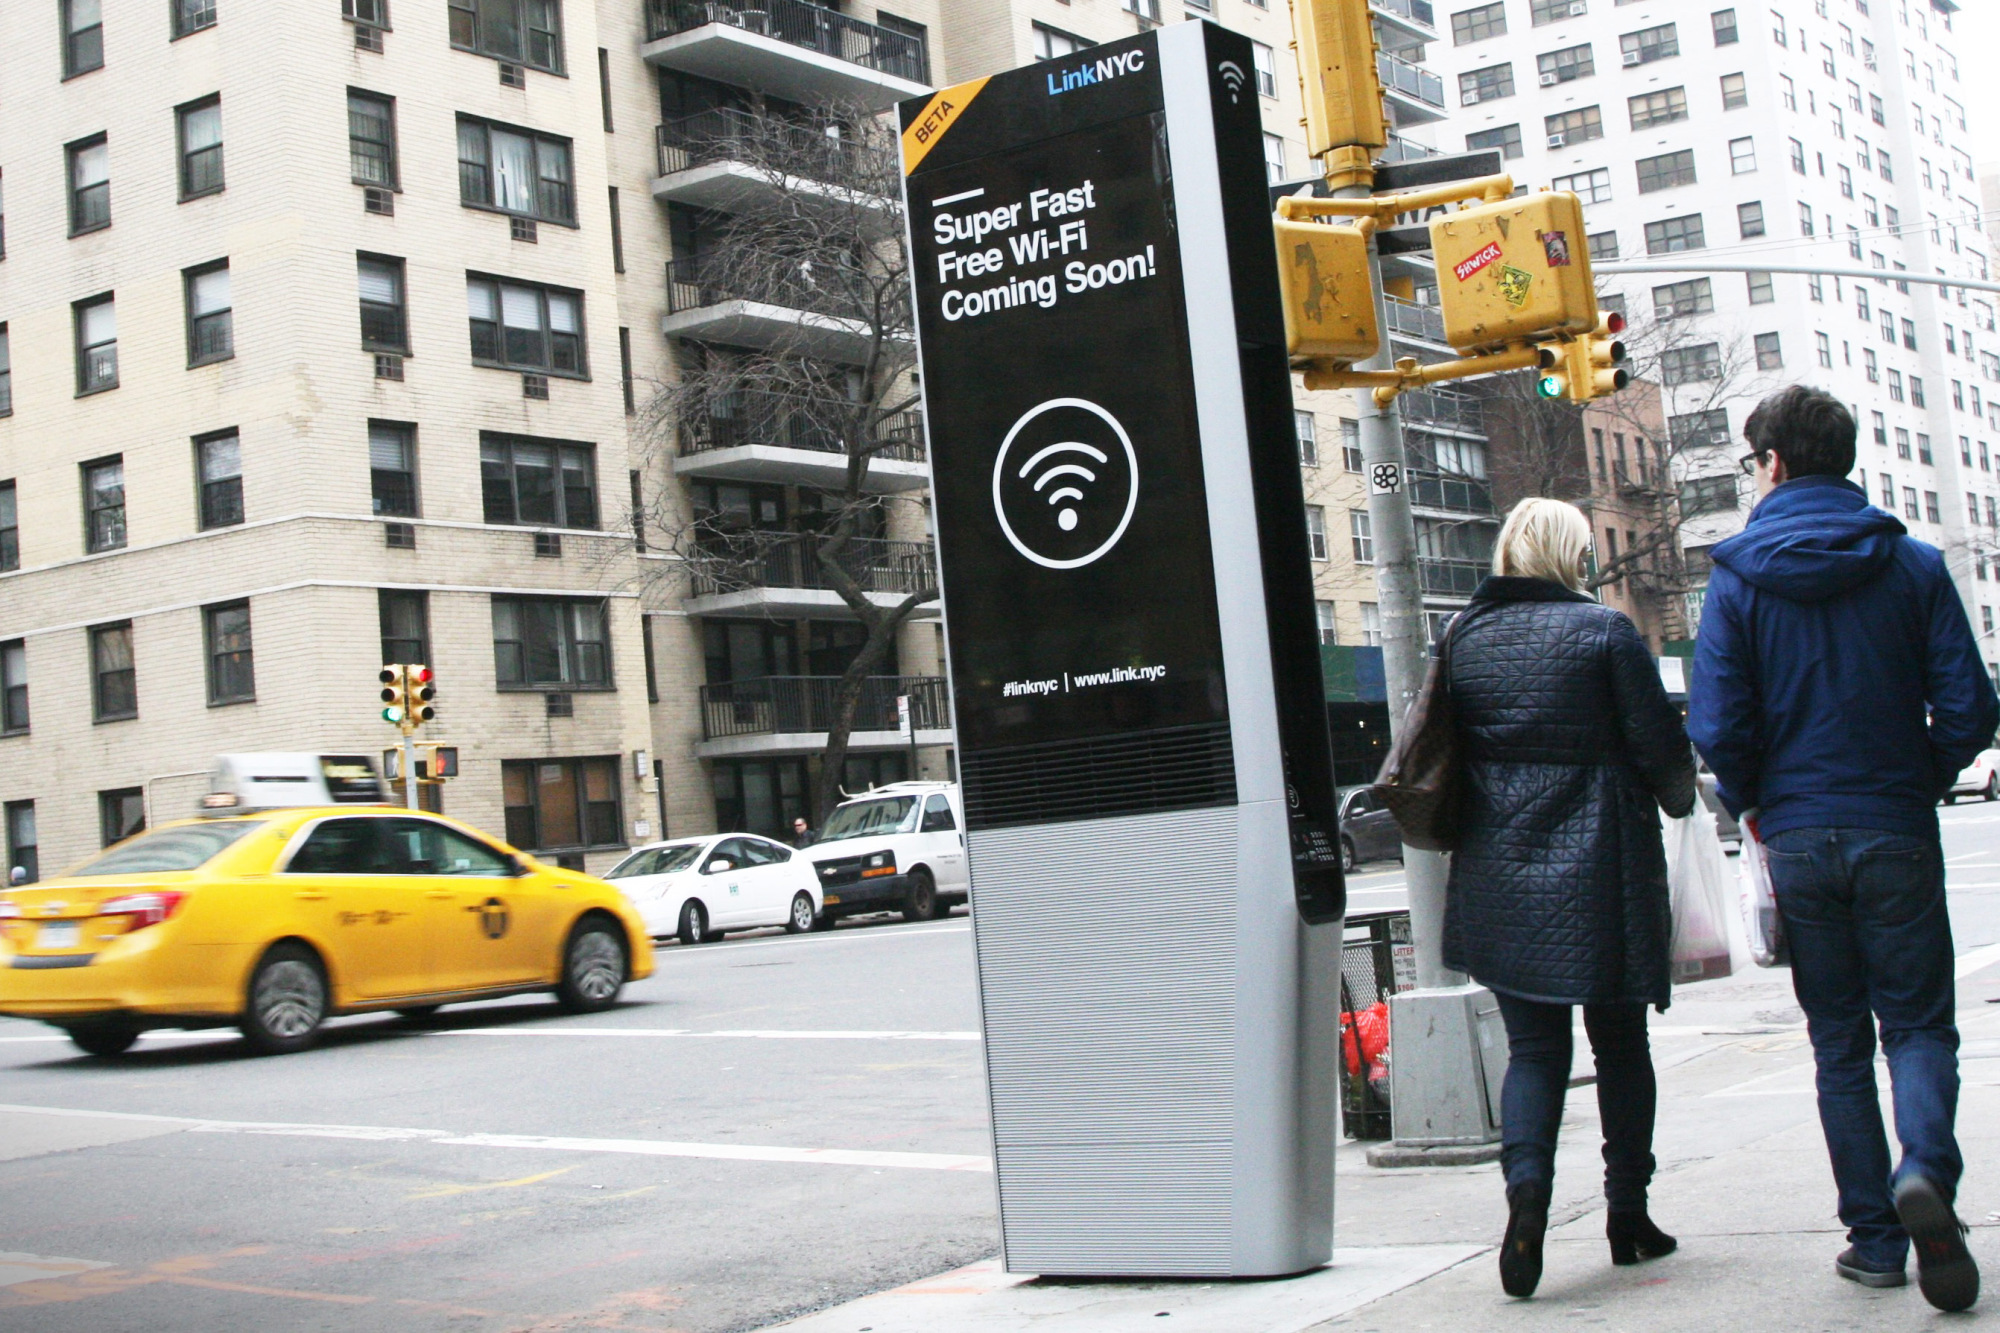 New Yorks Super-Fast Wi-Fi Is Live, and Free